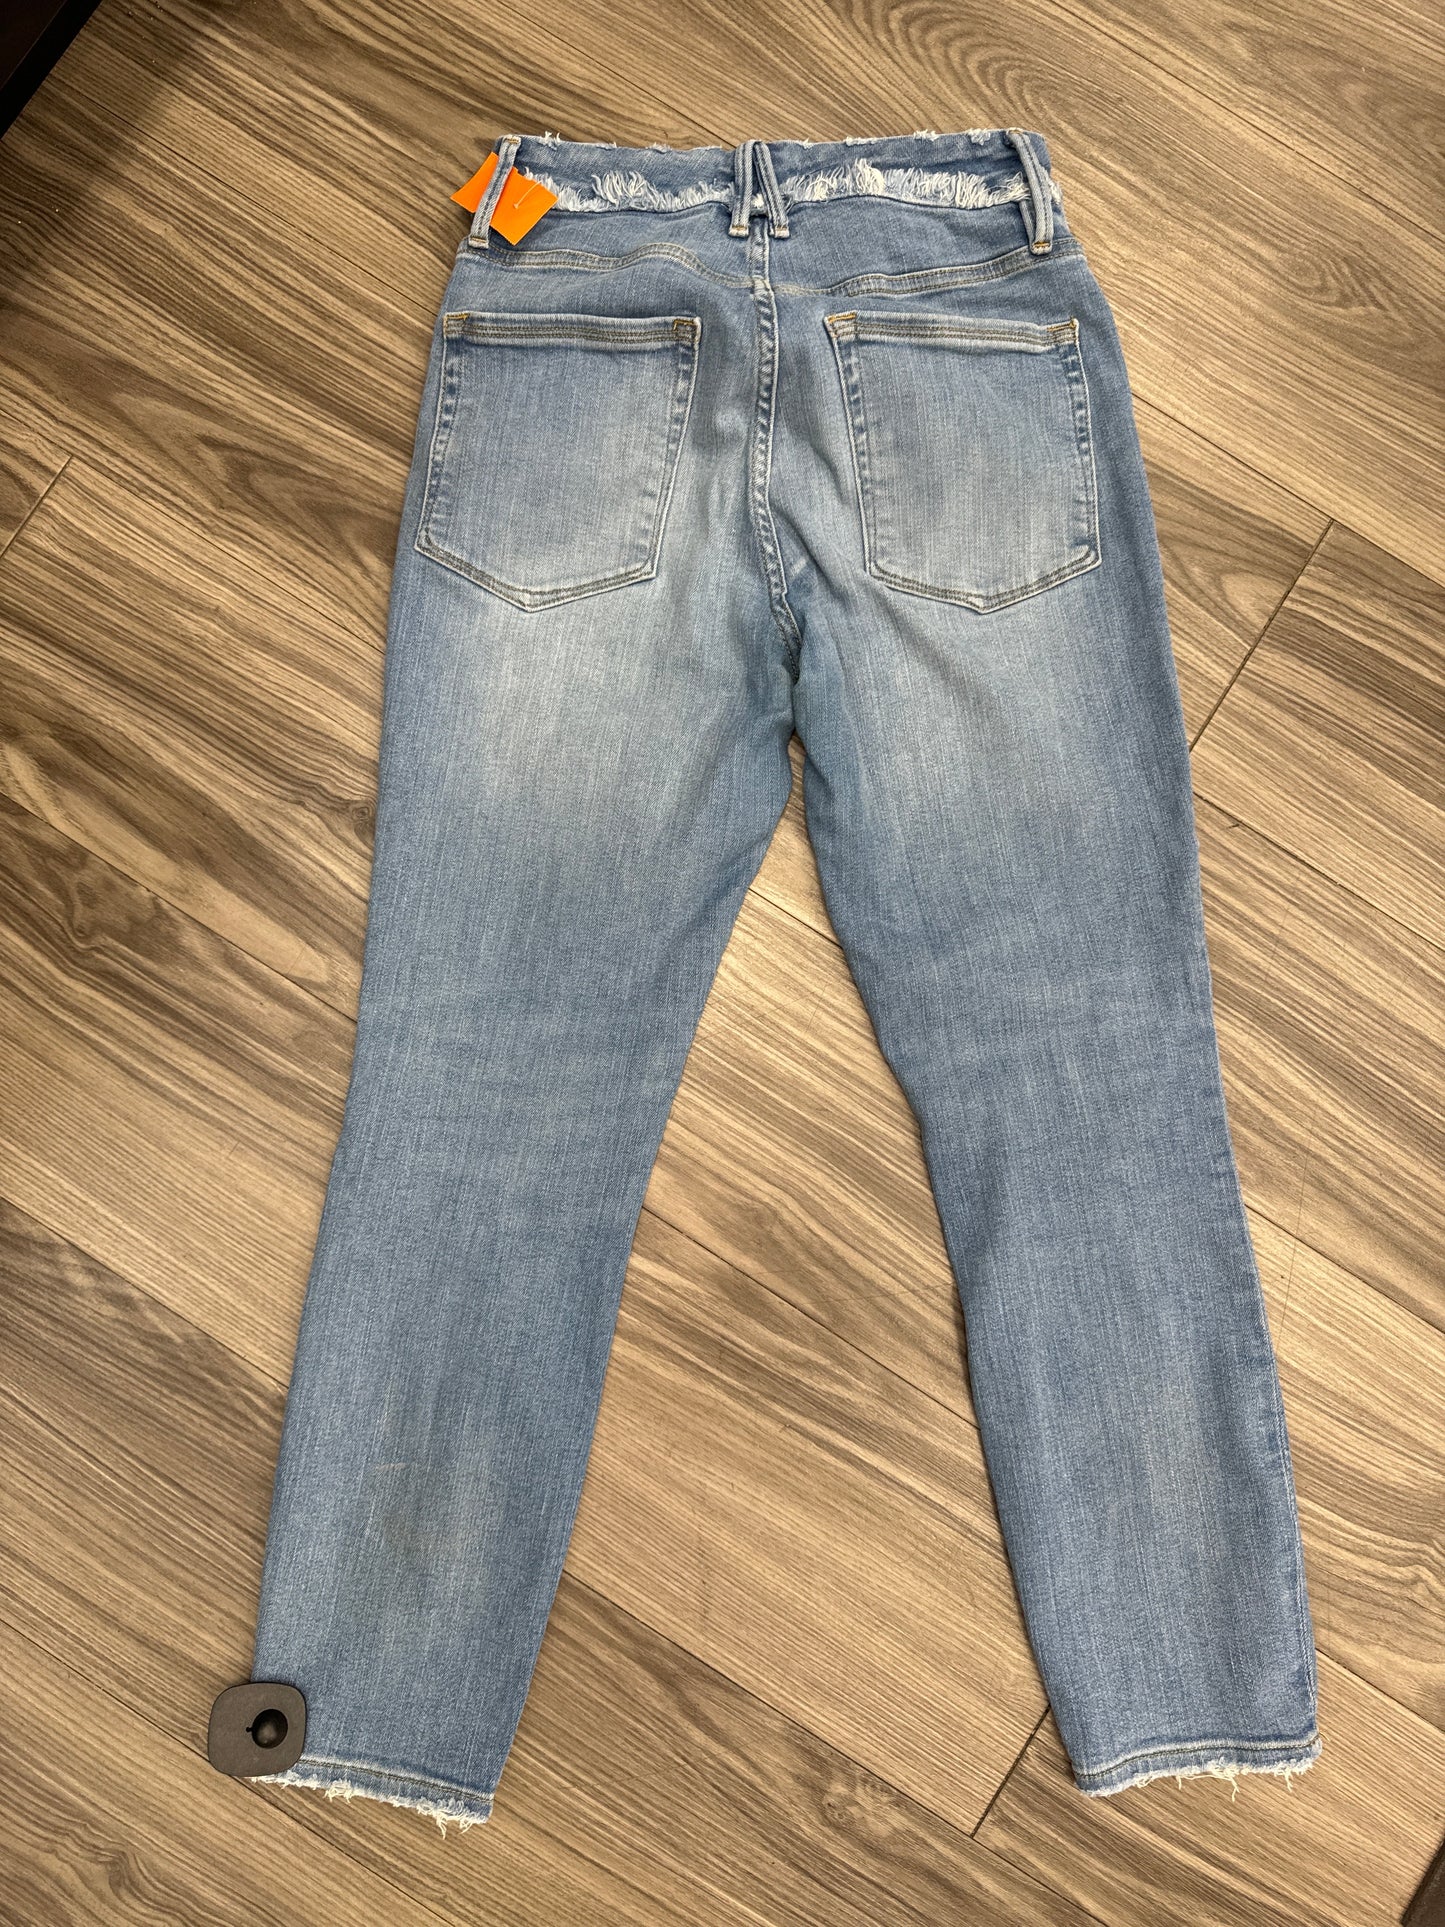 Jeans Cropped By Good American  Size: 6